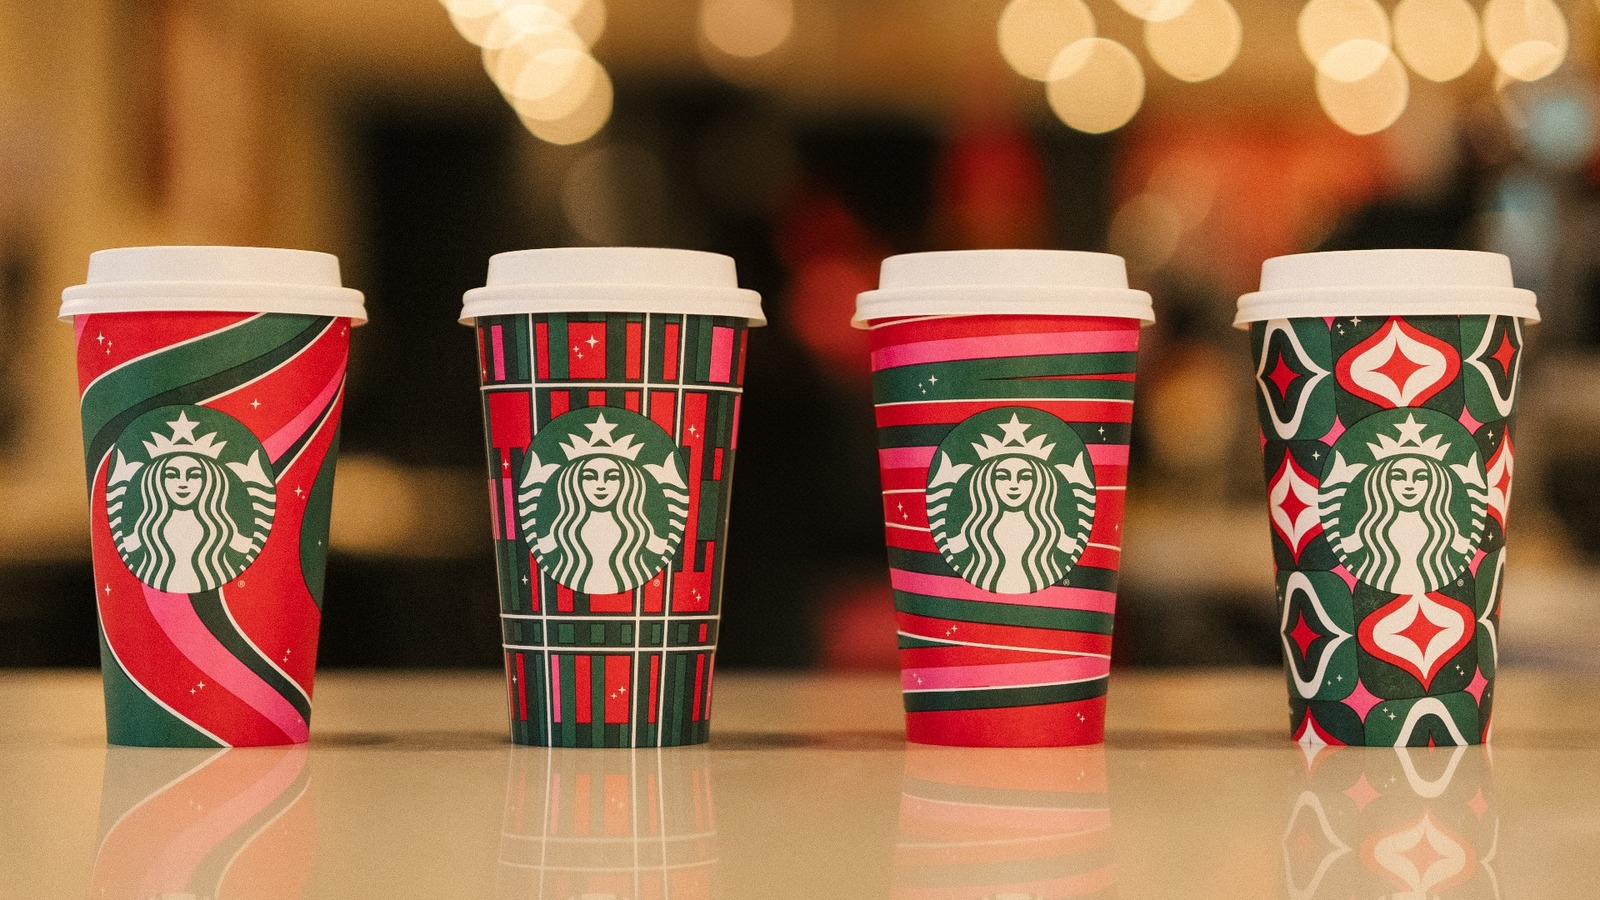 Starbucks' Beloved Red Cups Are Back With 4 Festive New Designs